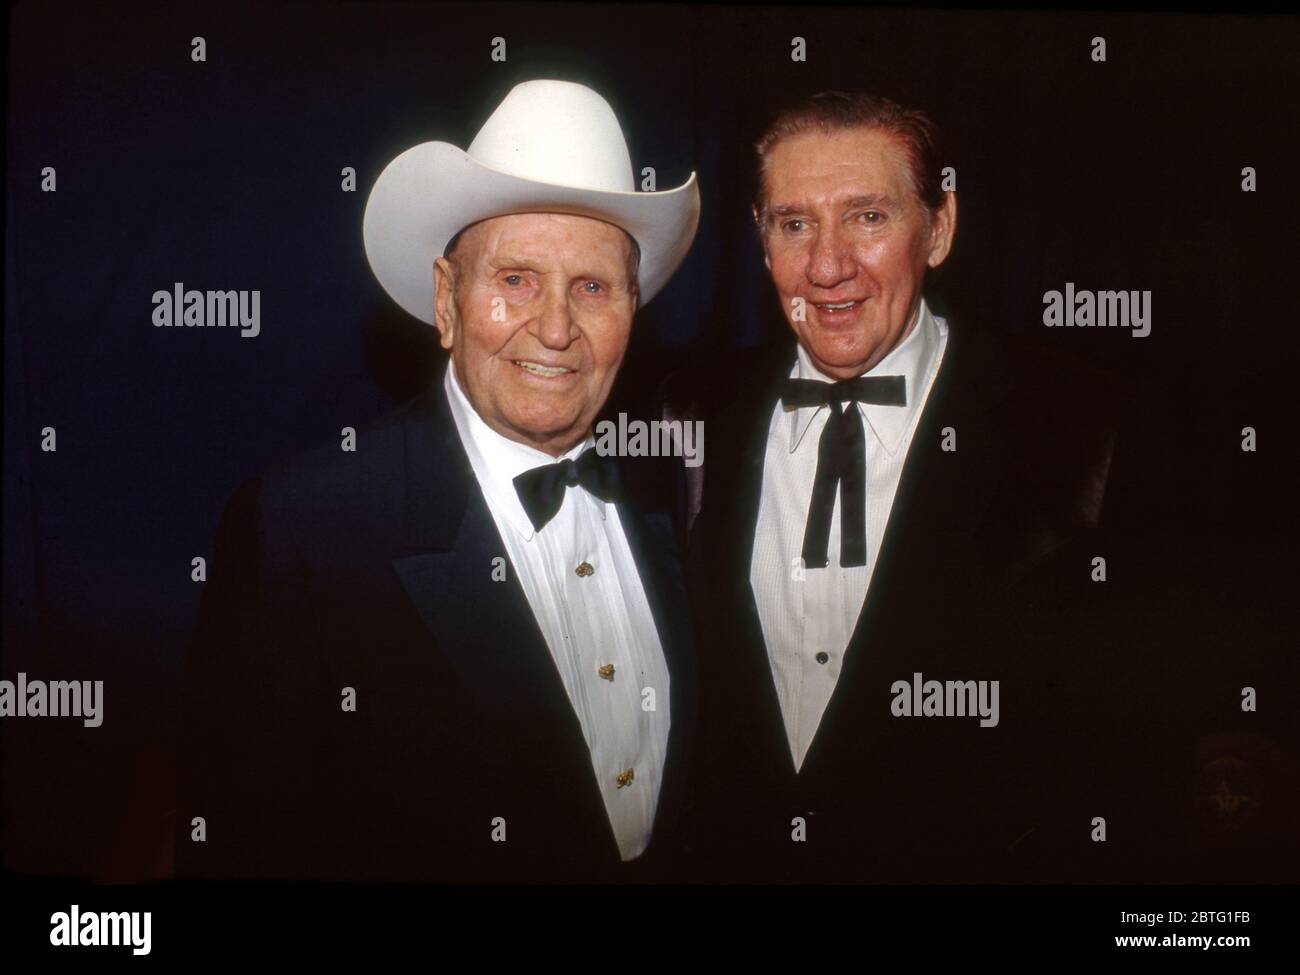 Gene Autry and his longtime sidekick Pat Buttram attending an event at the Gene Autry Museum in Los Angeles, Ca circa 1980s Stock Photo